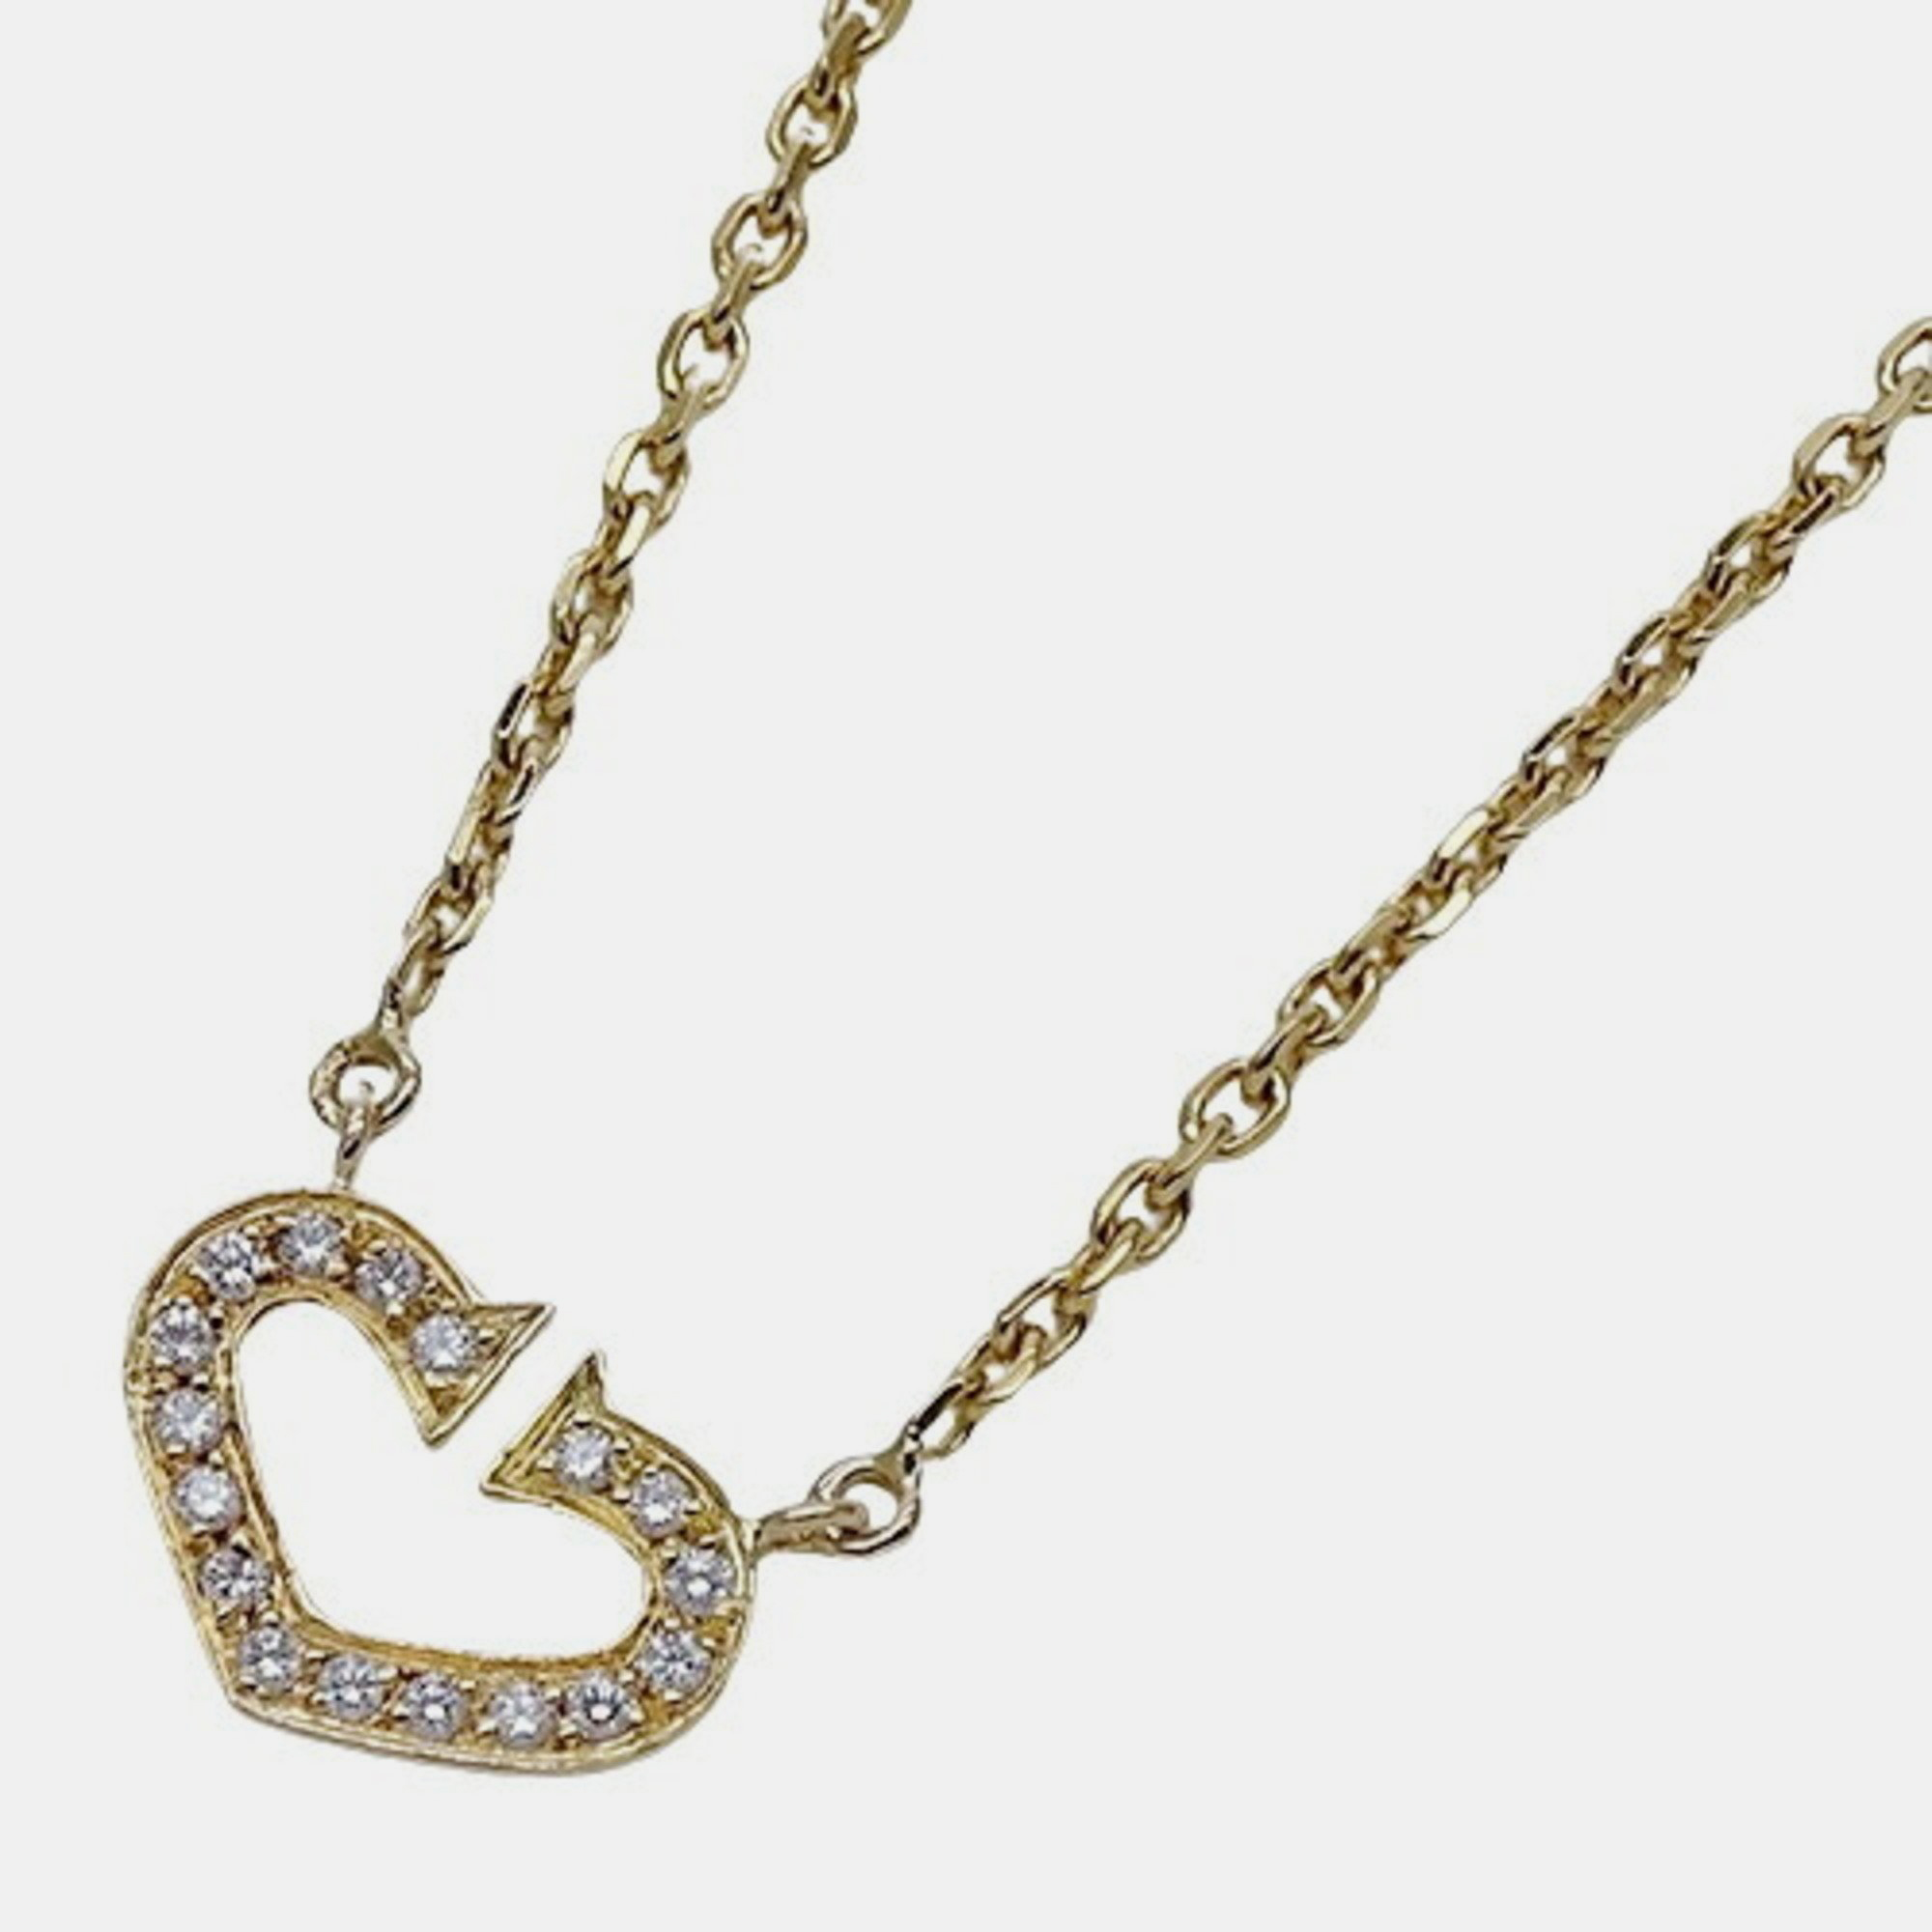 Cartier 18k yellow gold and diamond hearts and symbols pendant necklace